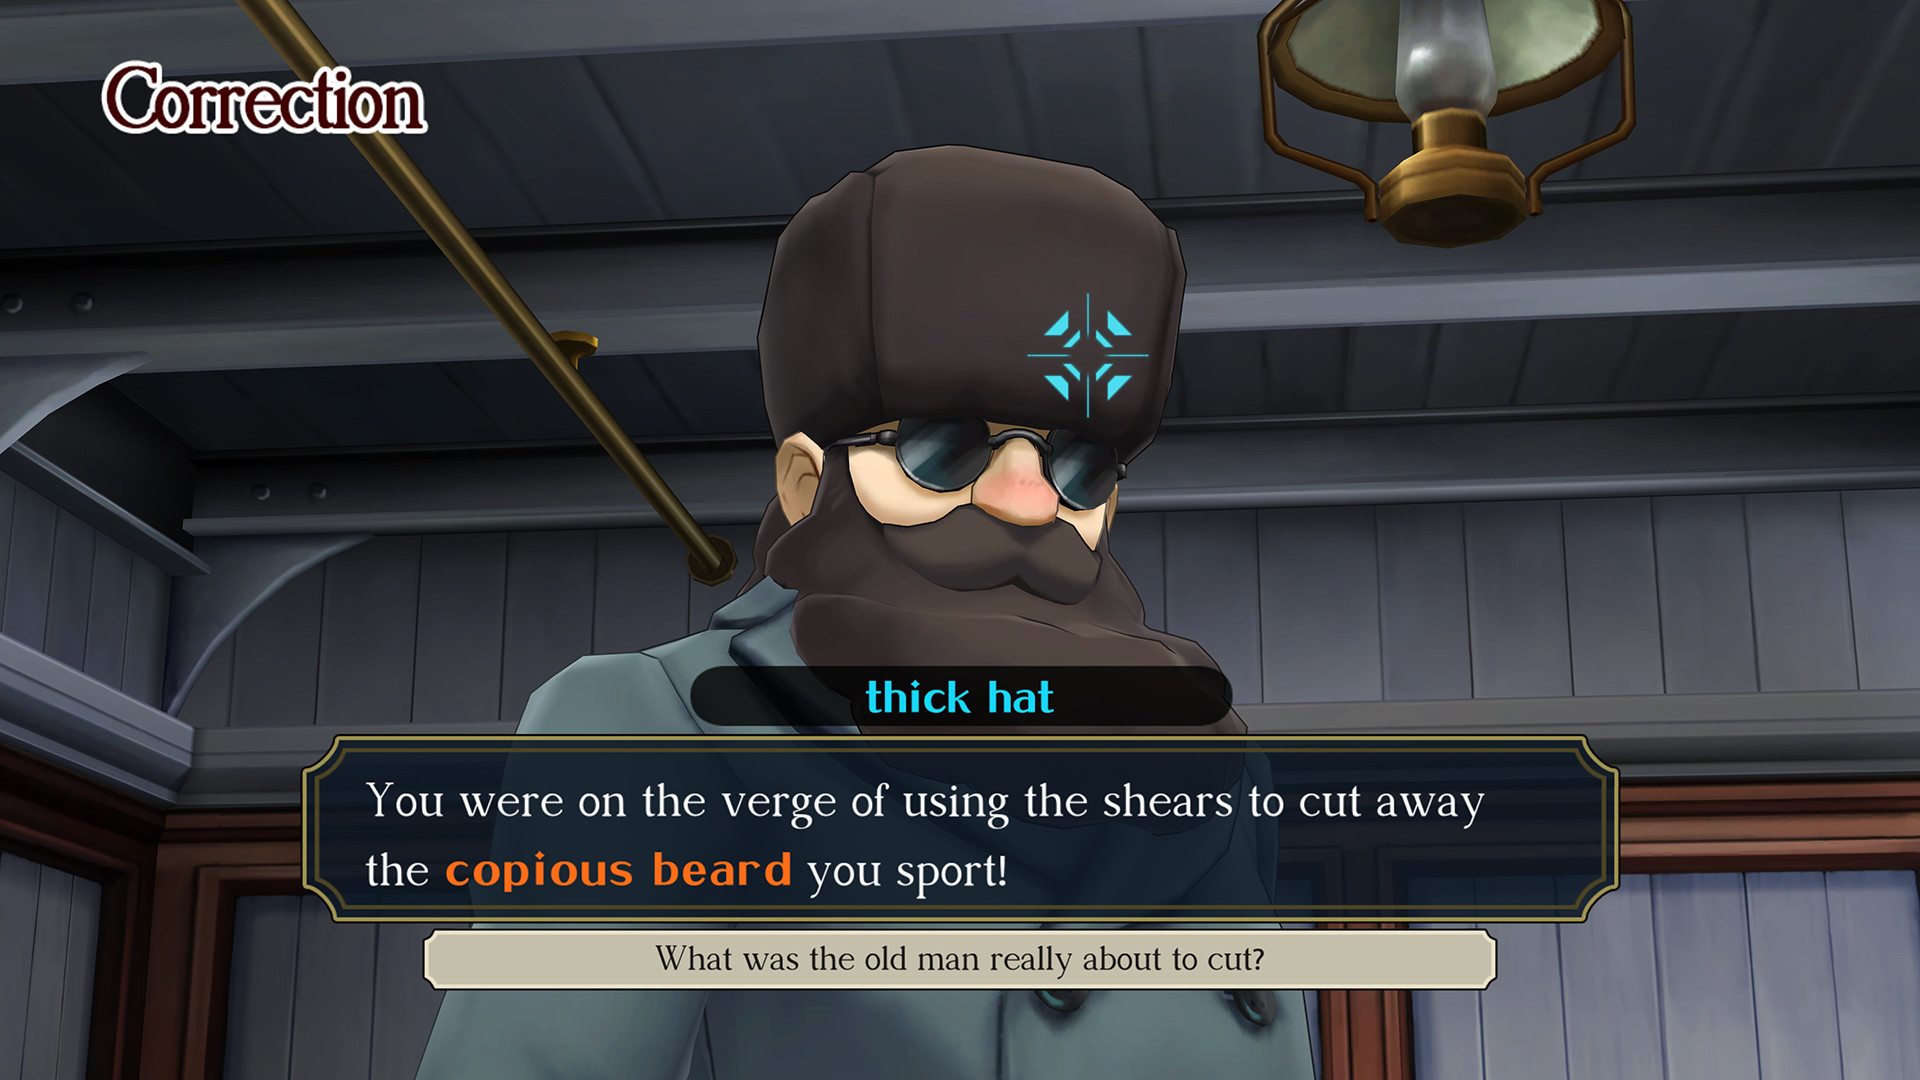 A screenshot of examining a man's hat. The prompt is asking what he was actually going to cut, the answer is his beard